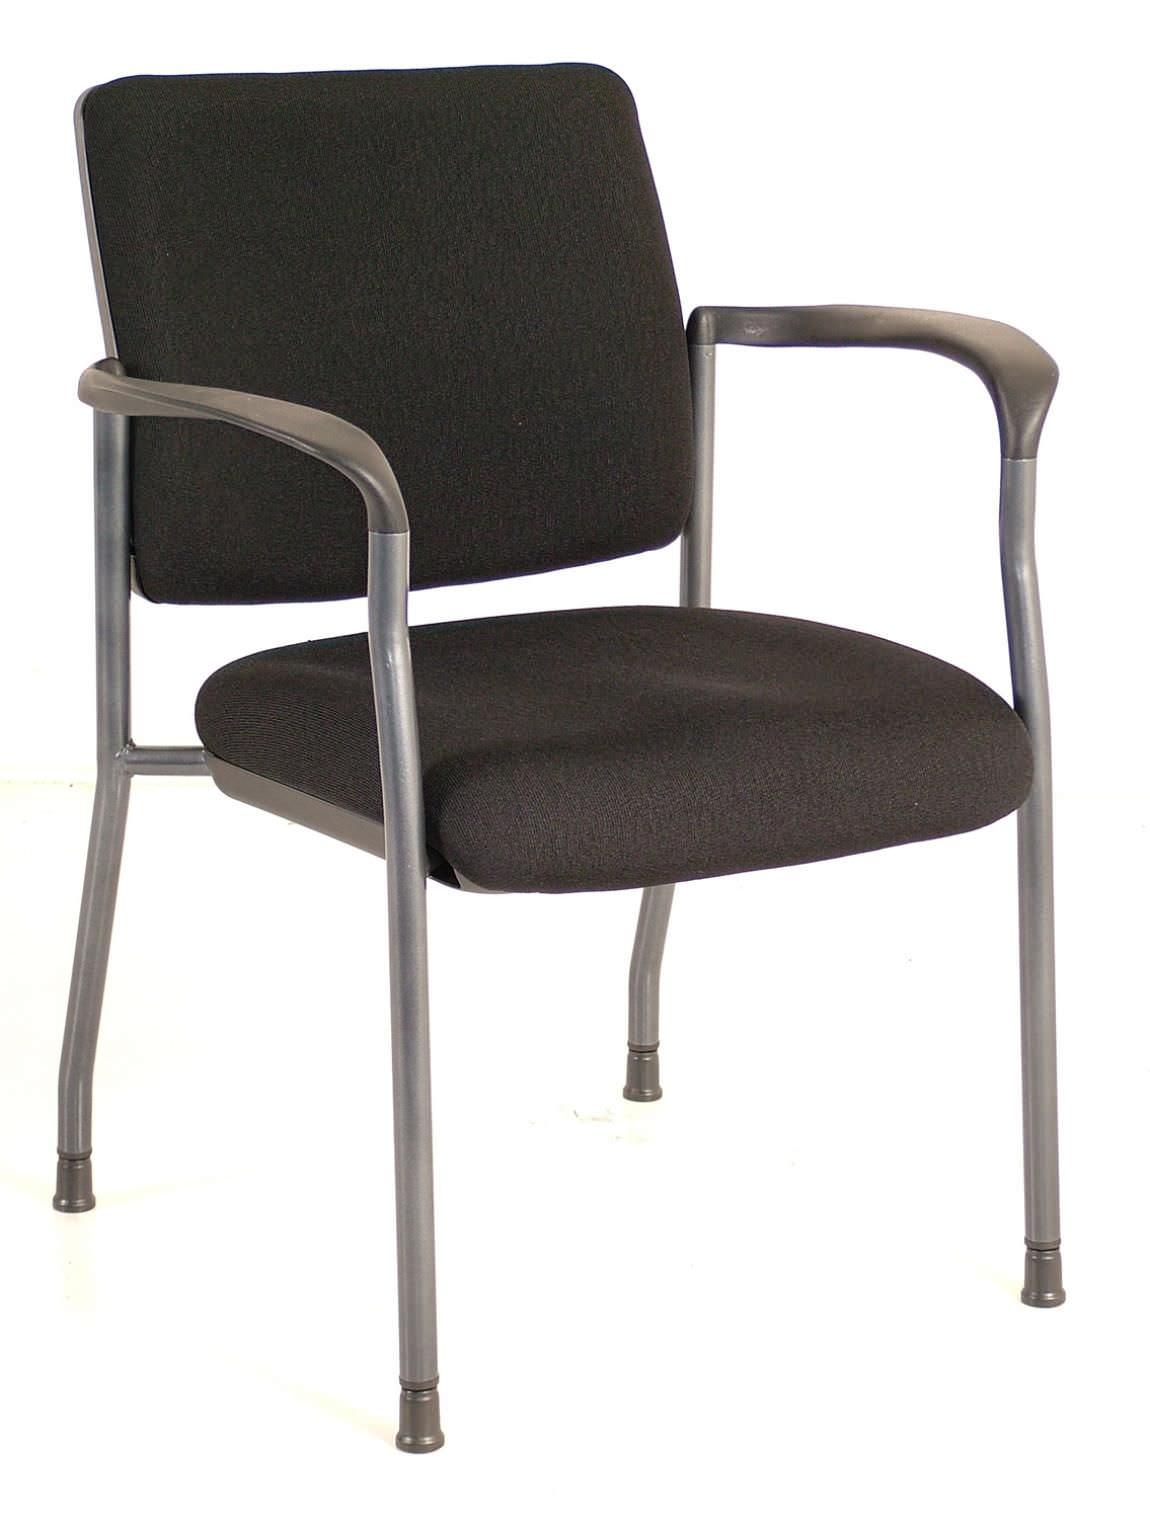 Black Stacking Chair with Arms